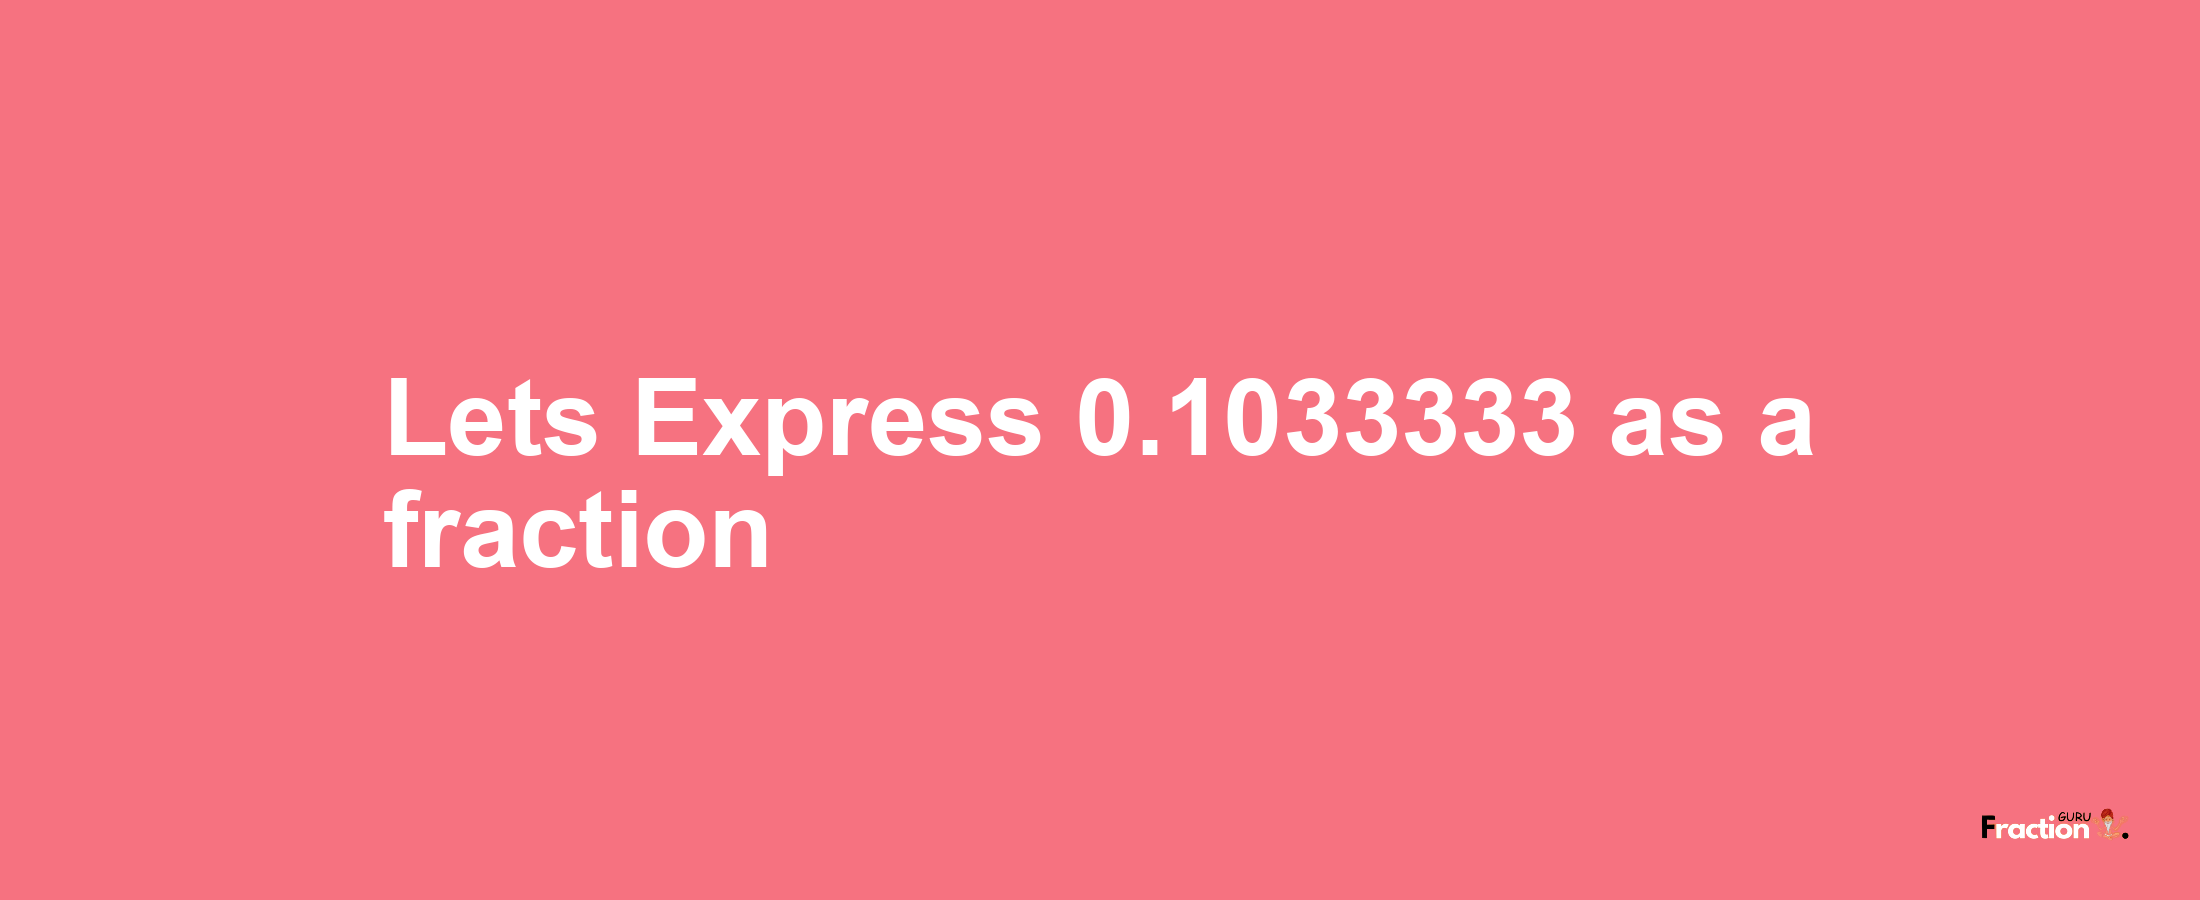 Lets Express 0.1033333 as afraction